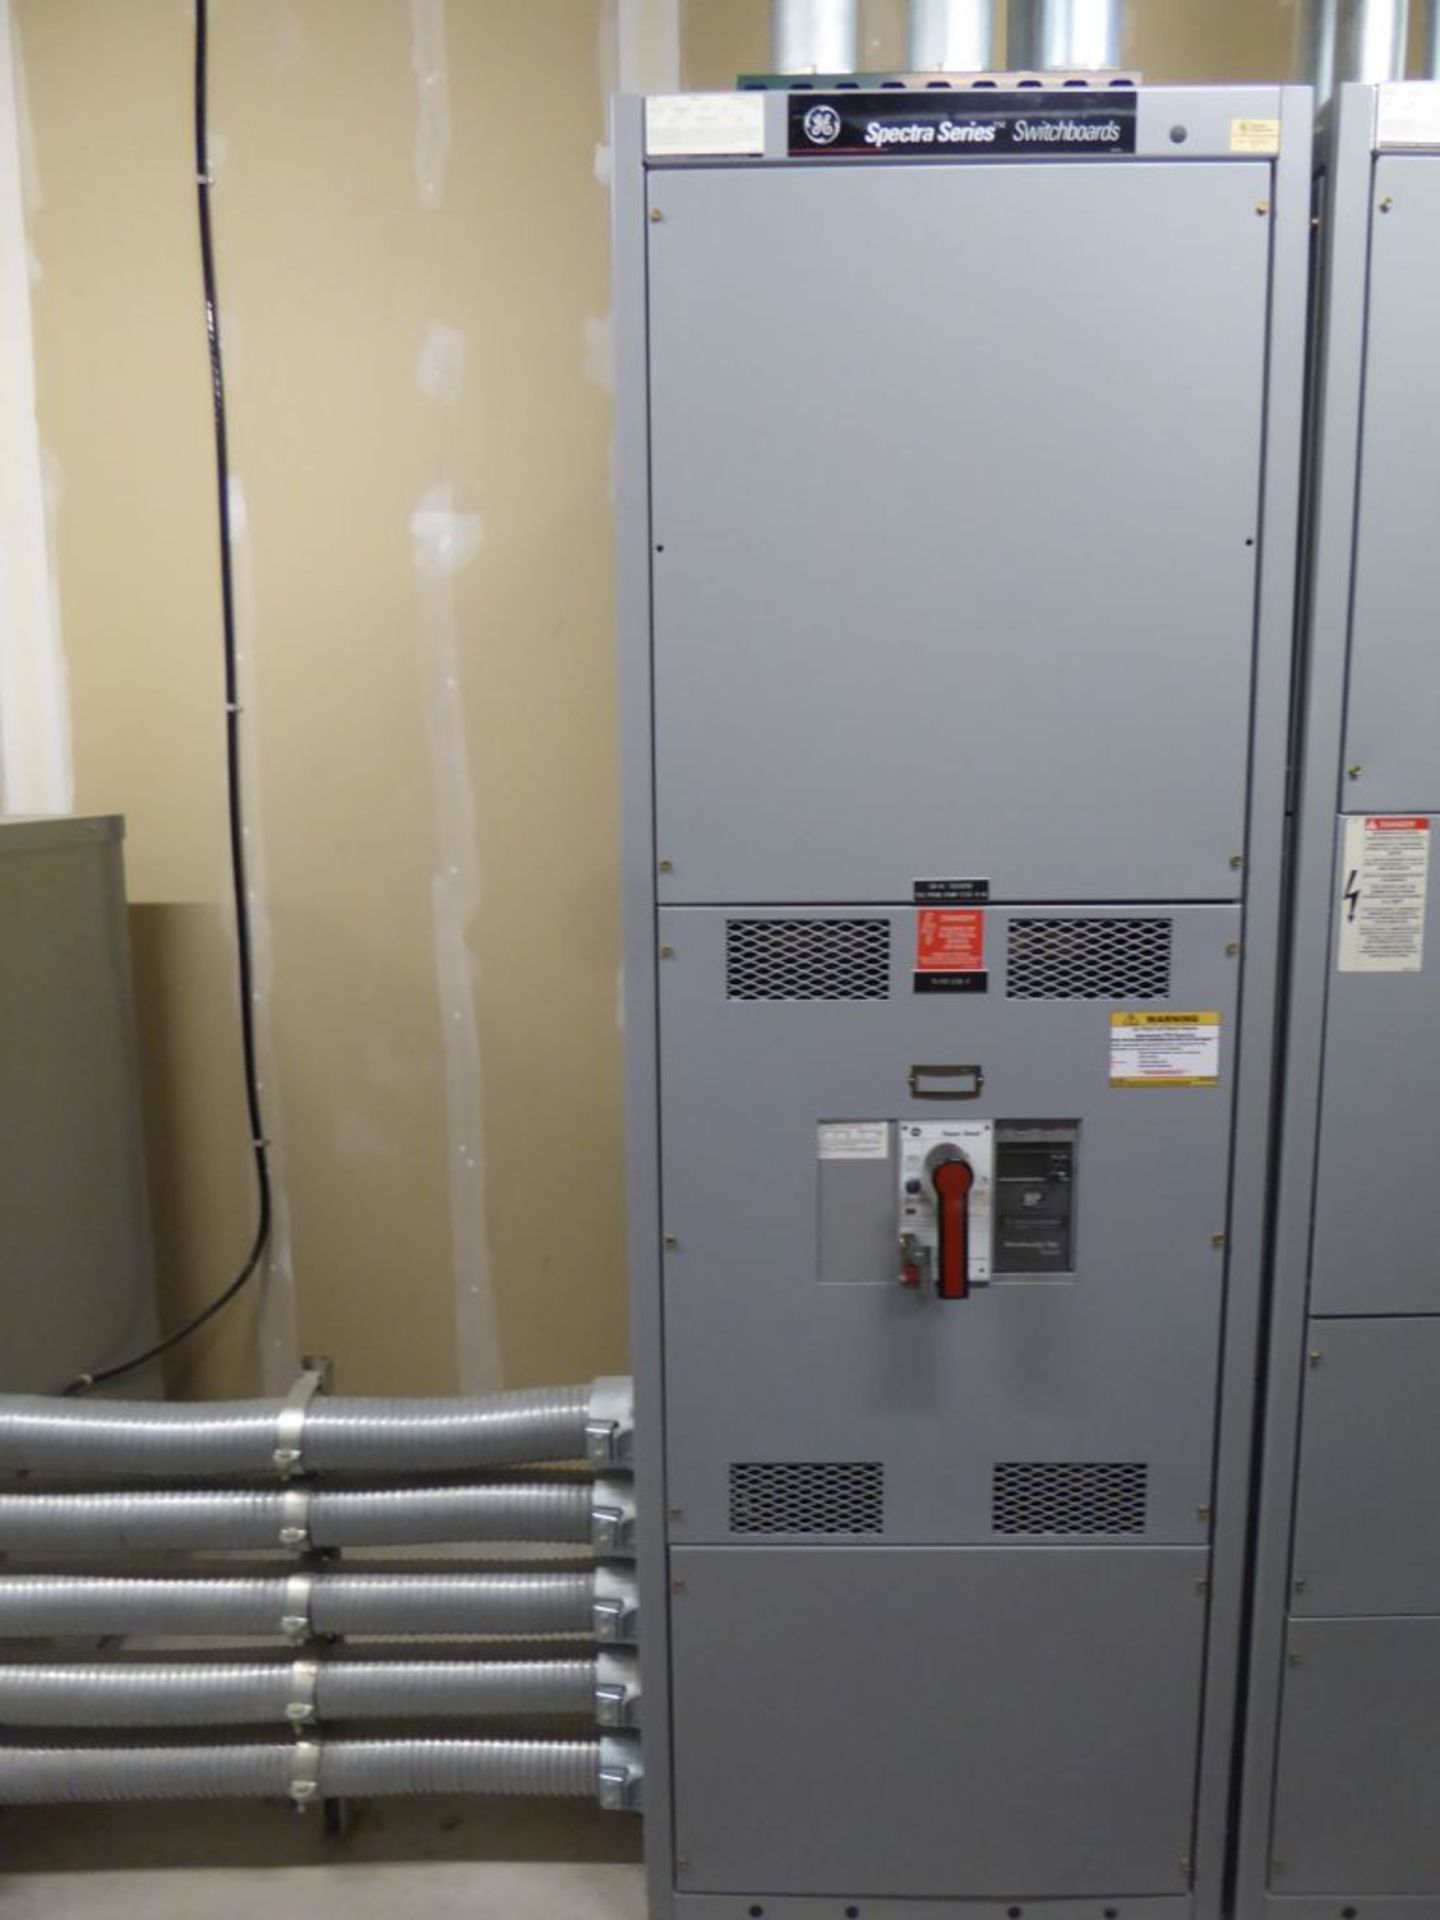 Spartanburg, SC - GE 1600A Spectra Series Switchboard